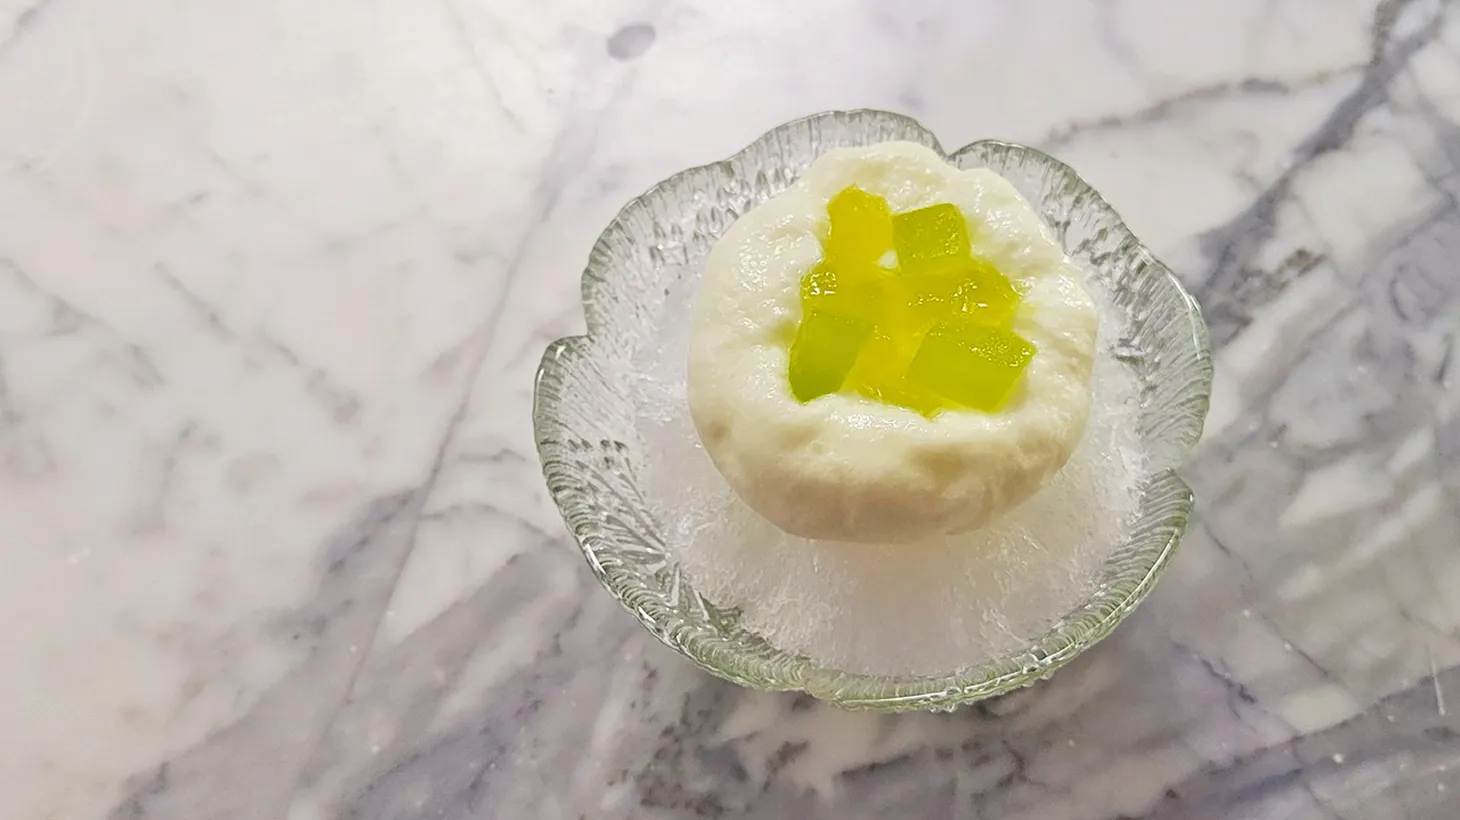 Jon Yao uses avara melons in a new shave ice course at Kato.